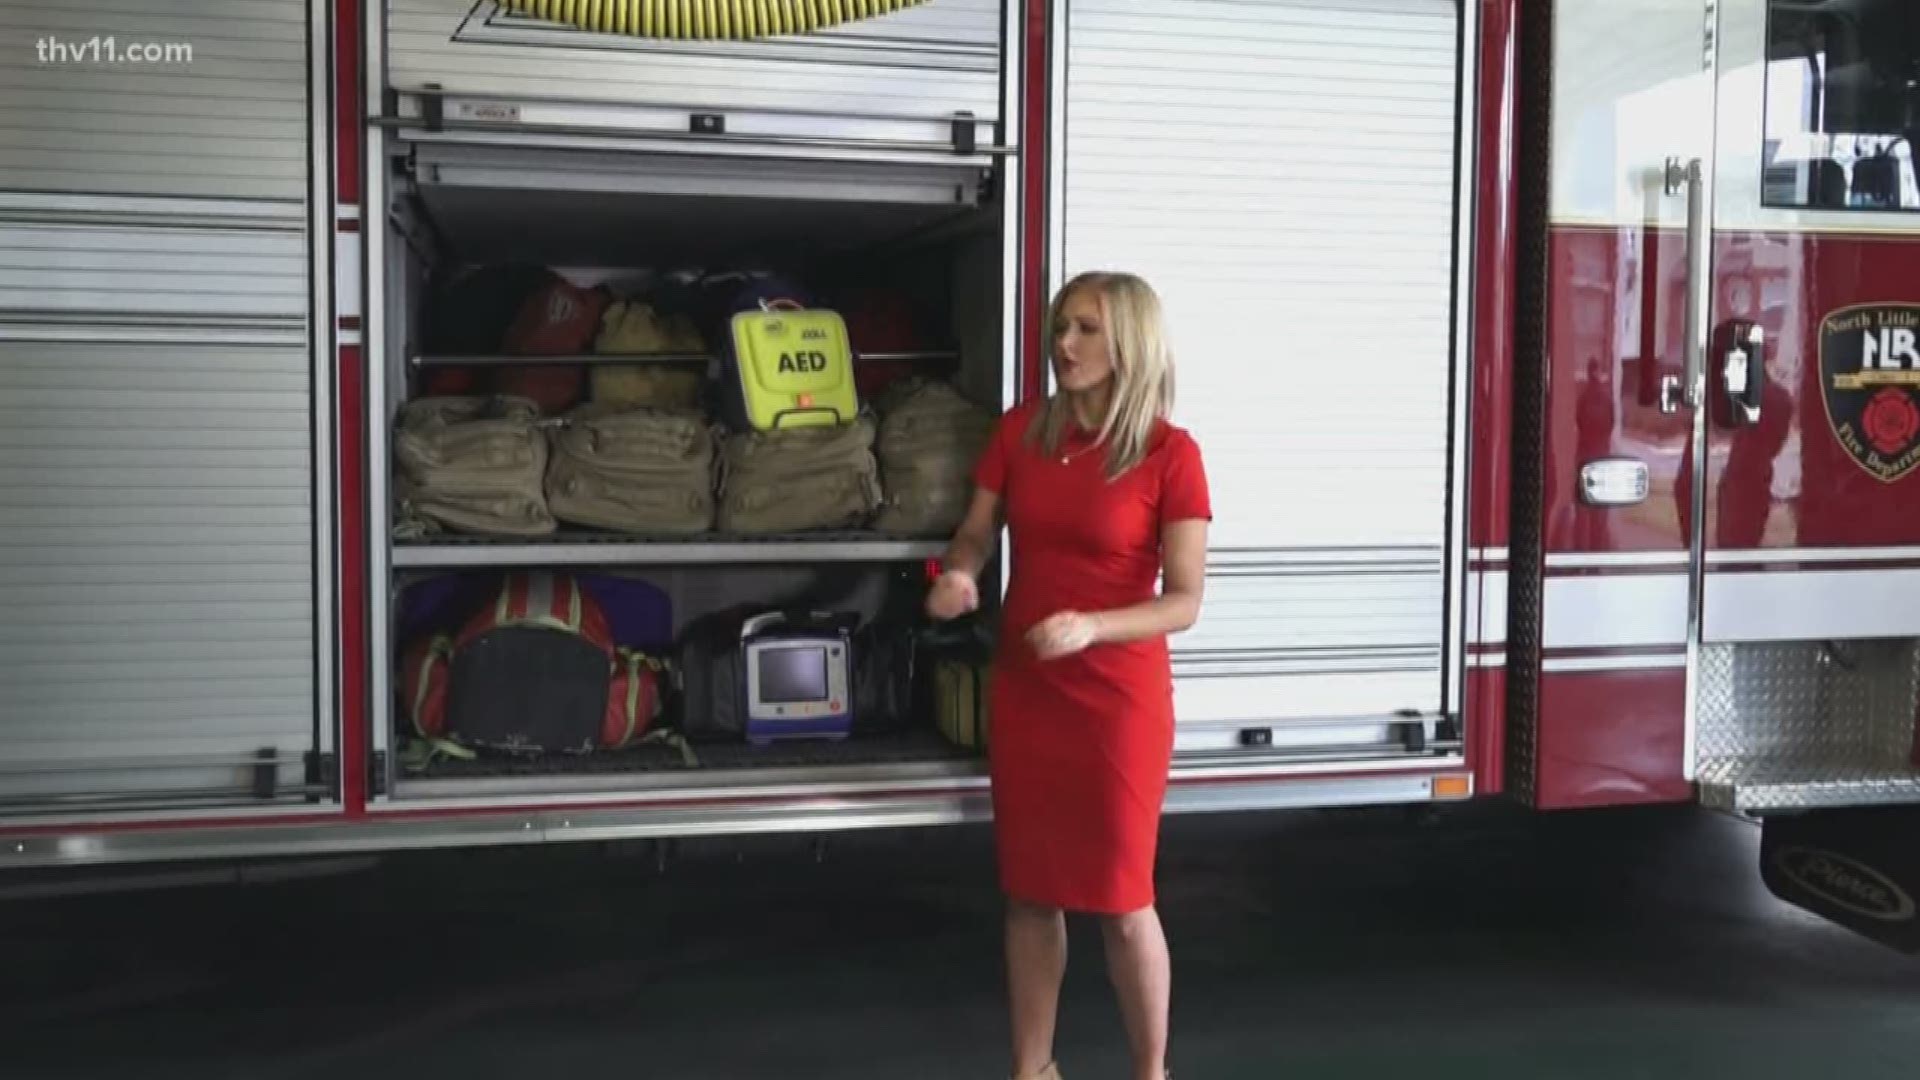 The North Little Rock Fire Department has new AEDs to help them save lives in the event of an emergency.